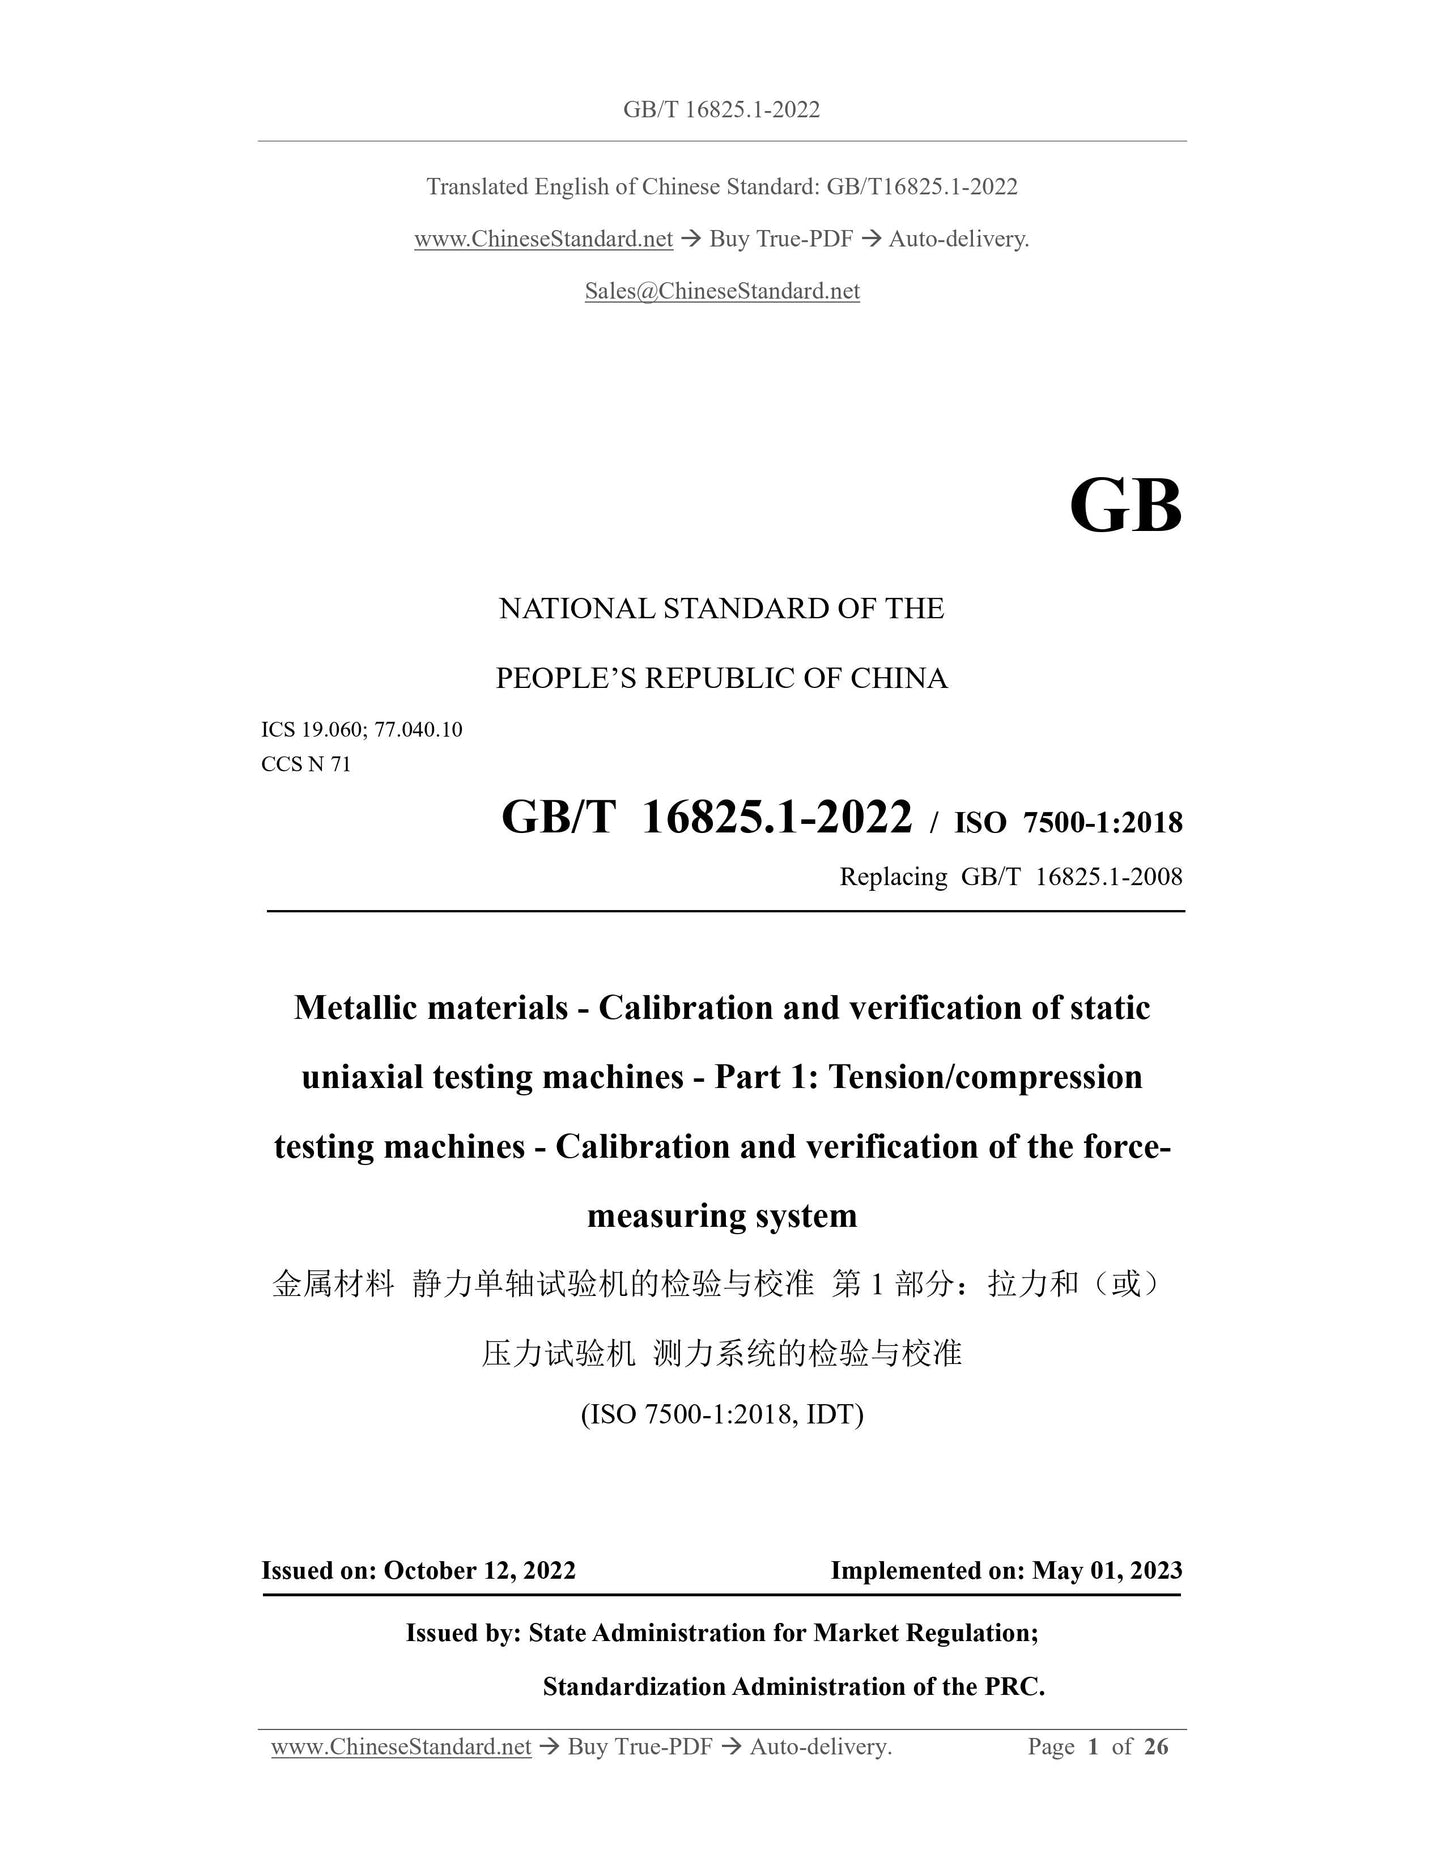 GB/T 16825.1-2022 Page 1